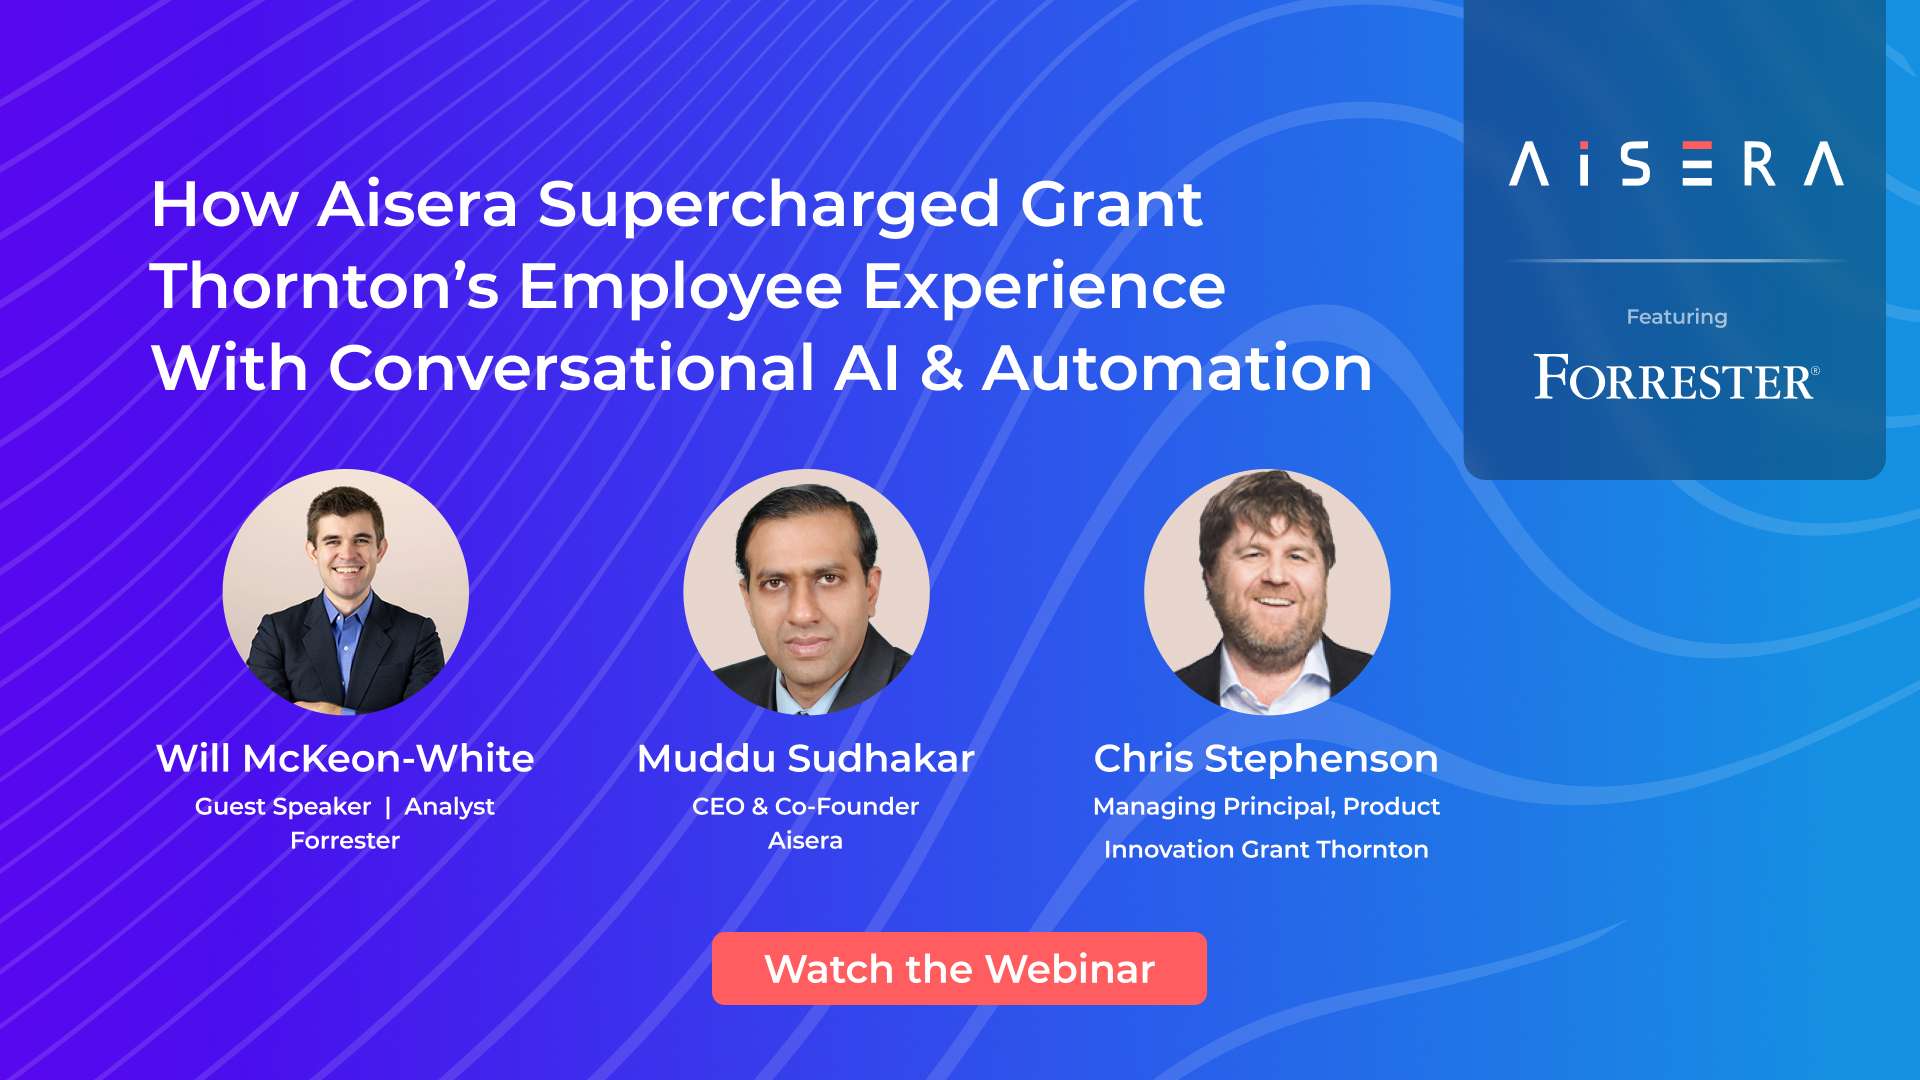 How Aisera Supercharged Grant Thornton’s Employee Experience with Conversational AI & Automation